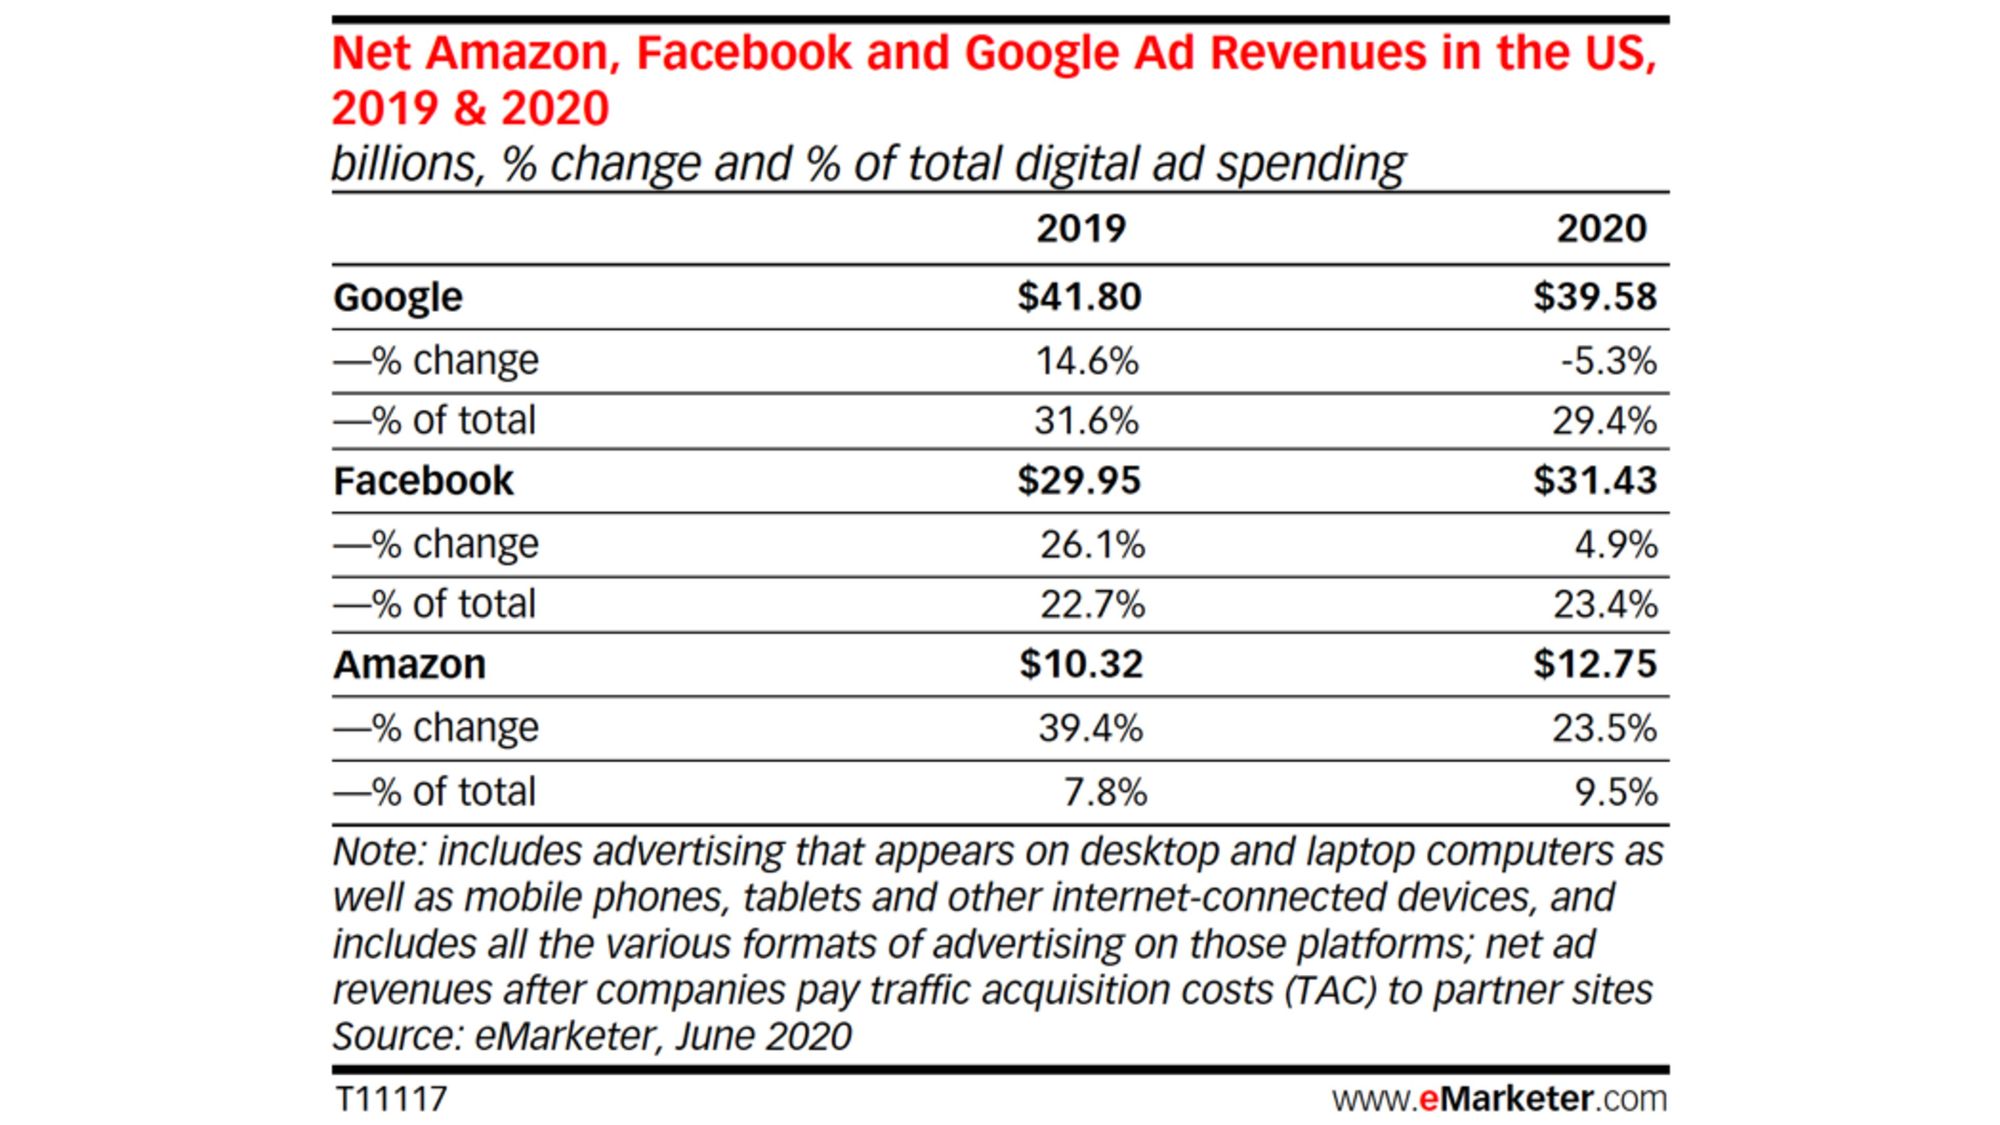 Google’s ad revenues to drop in the US